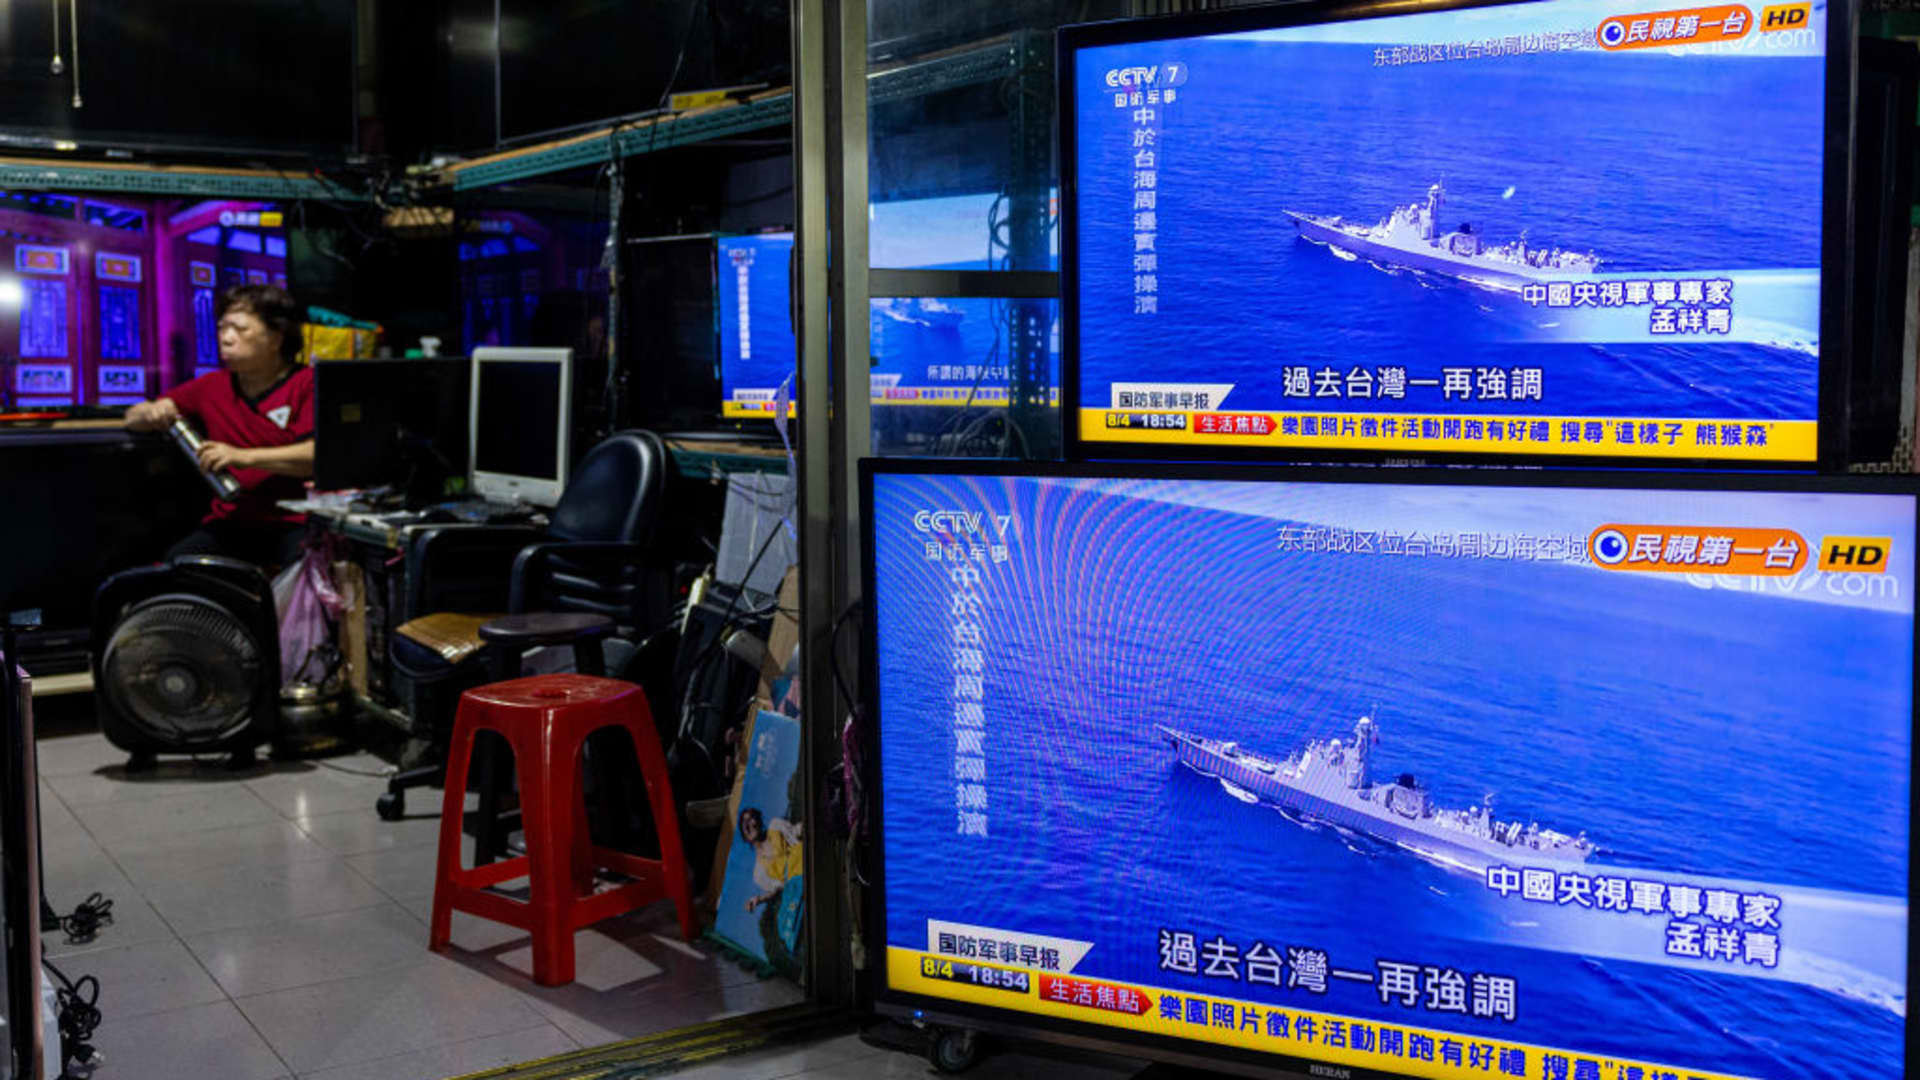 Asia markets set to fall as China conducts military drills near Taiwan